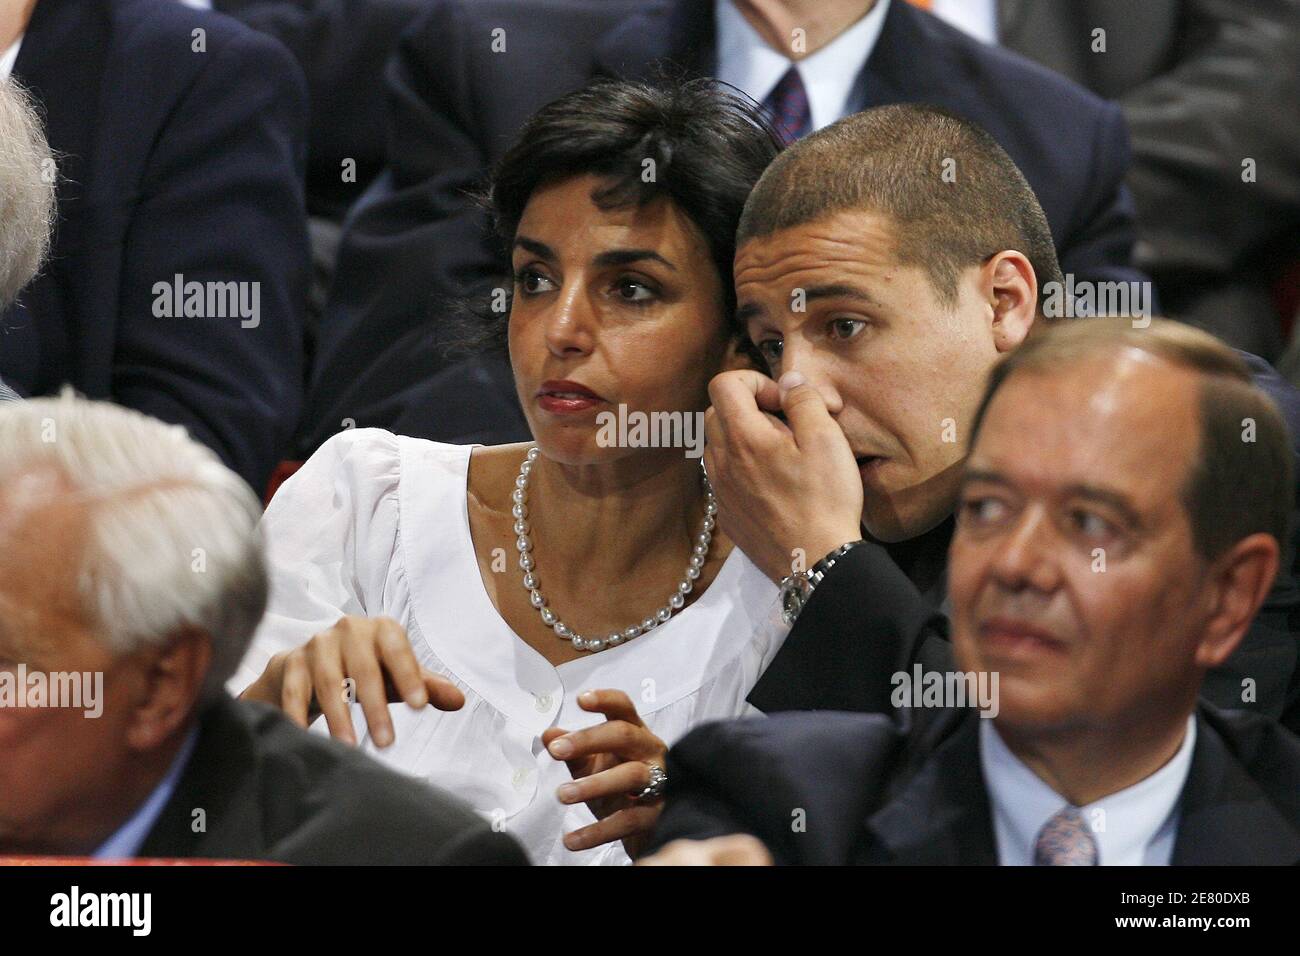 'Rachida Dati and singer Faudel are seen listening to Presidential frontrunner Nicolas Sarkozy adressing tens of thousands of supporters at Paris Bercy concert hall in Paris, France, April 29, 2007. Sarkozy went on the offensive Sunday, charging that he had been unjustly depicted as authoritarian as the battle for the Elysee entered its final week. The rightwinger said he had suffered ''personal attacks'' during the campaign that had targeted his ''honour, sincerity, personality and character.'' Photo By Bisson-Taamallah-Orban/ABACAPRESS.COM' Stock Photo